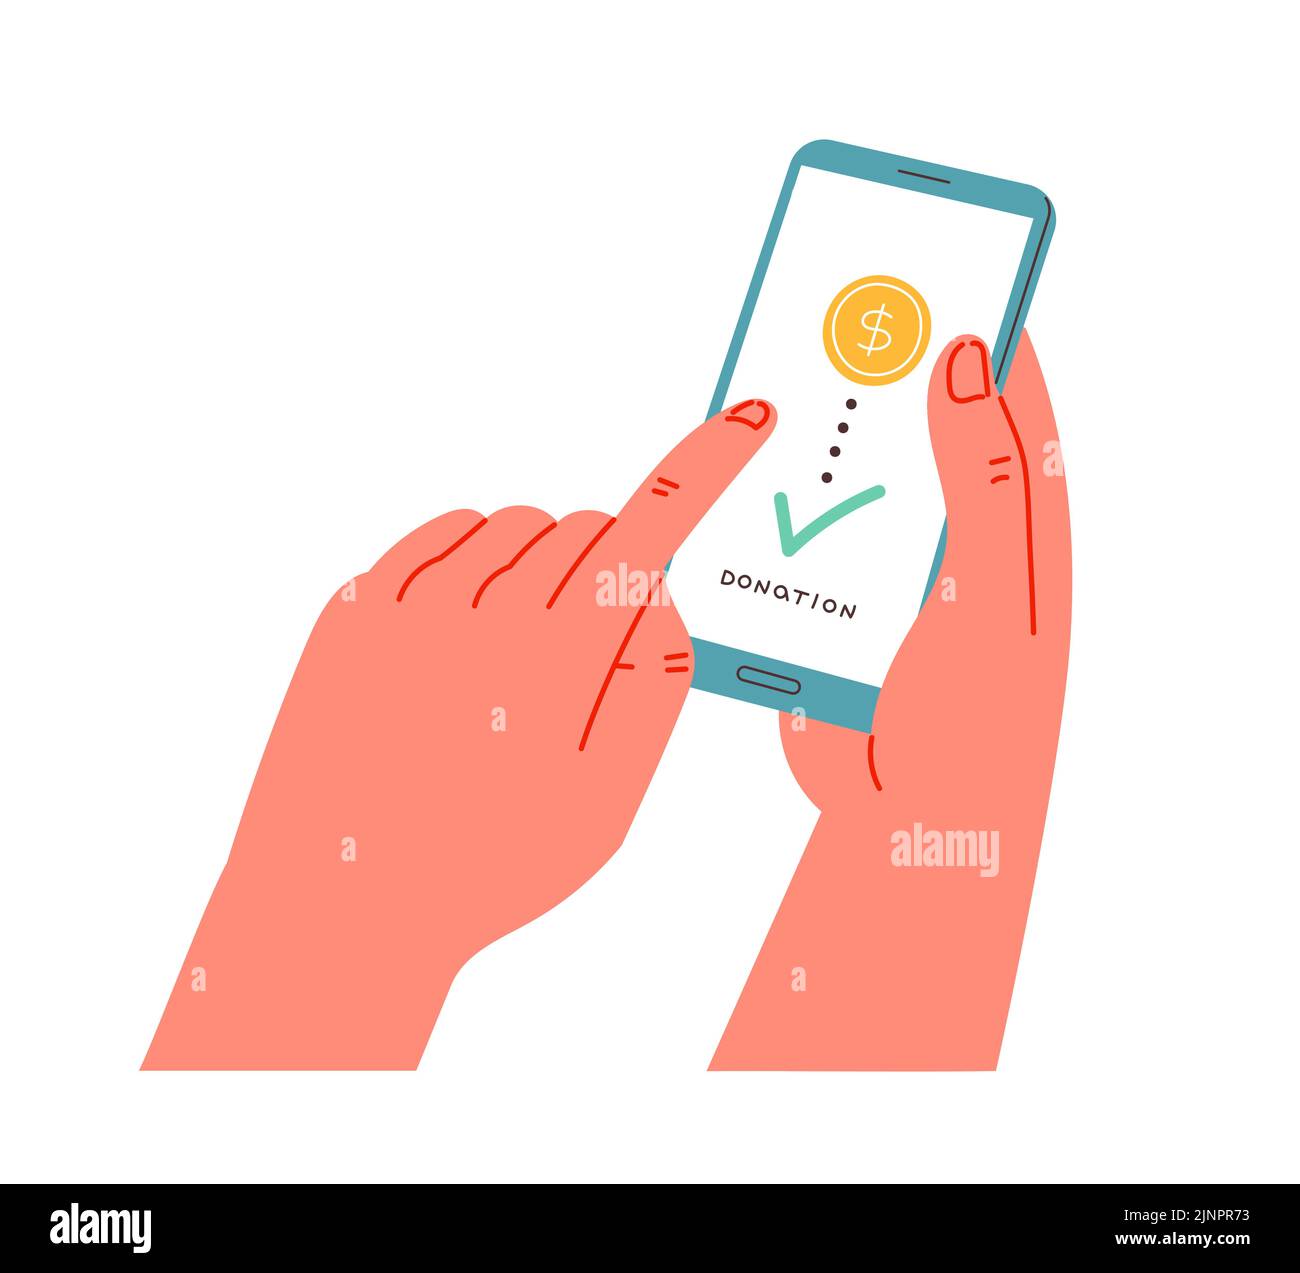 Mobile app on smartphone for donations and fundraising. Stock Vector